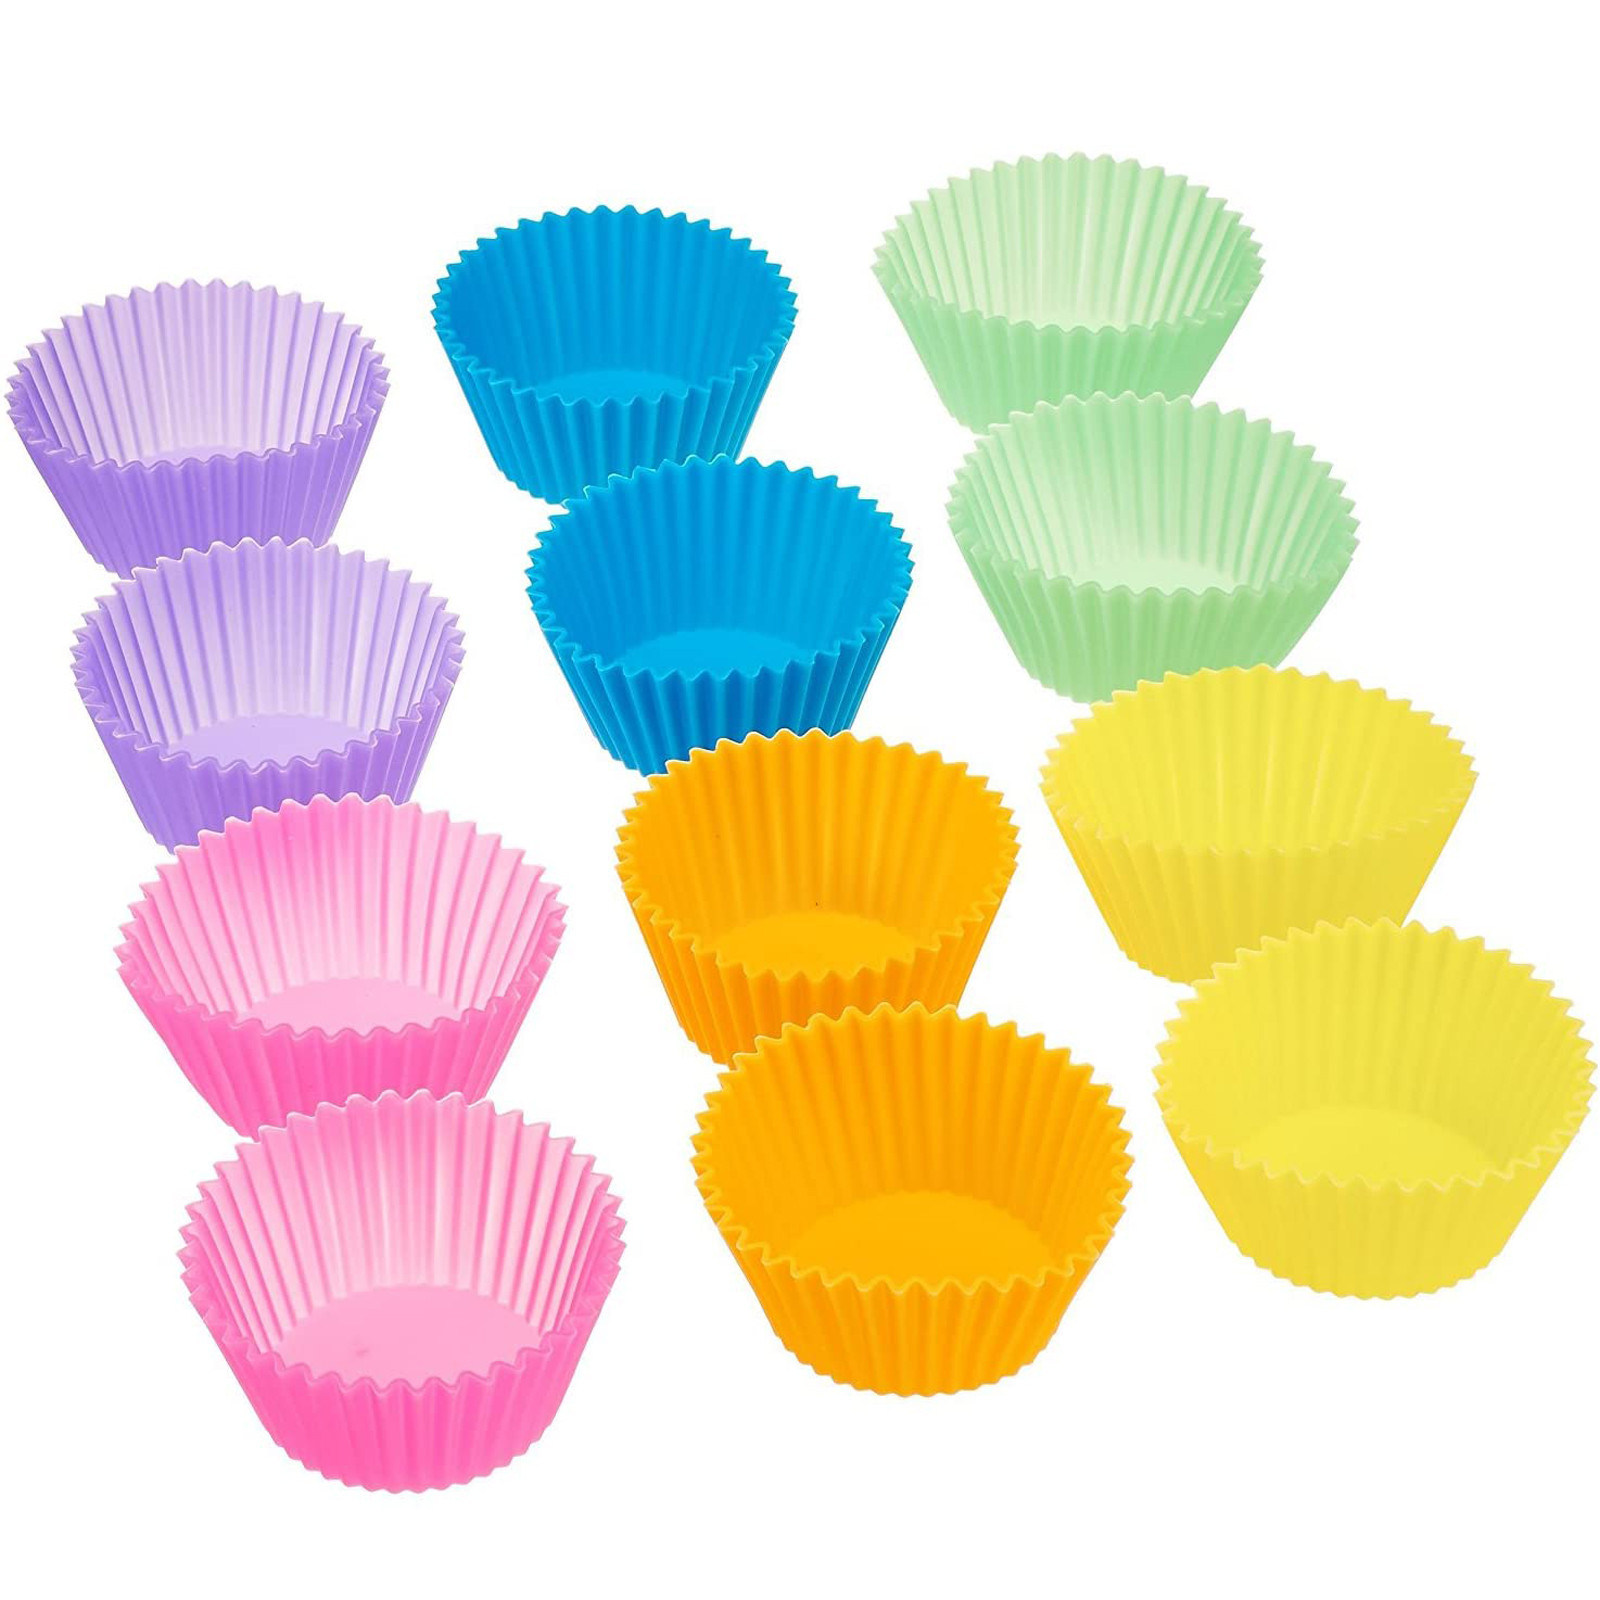 Silicone Cake Cupcake Cup Bakeware Baking Silicone Molds Muffin Cupcake Molds DIY Cake Decorating Tools Accessories